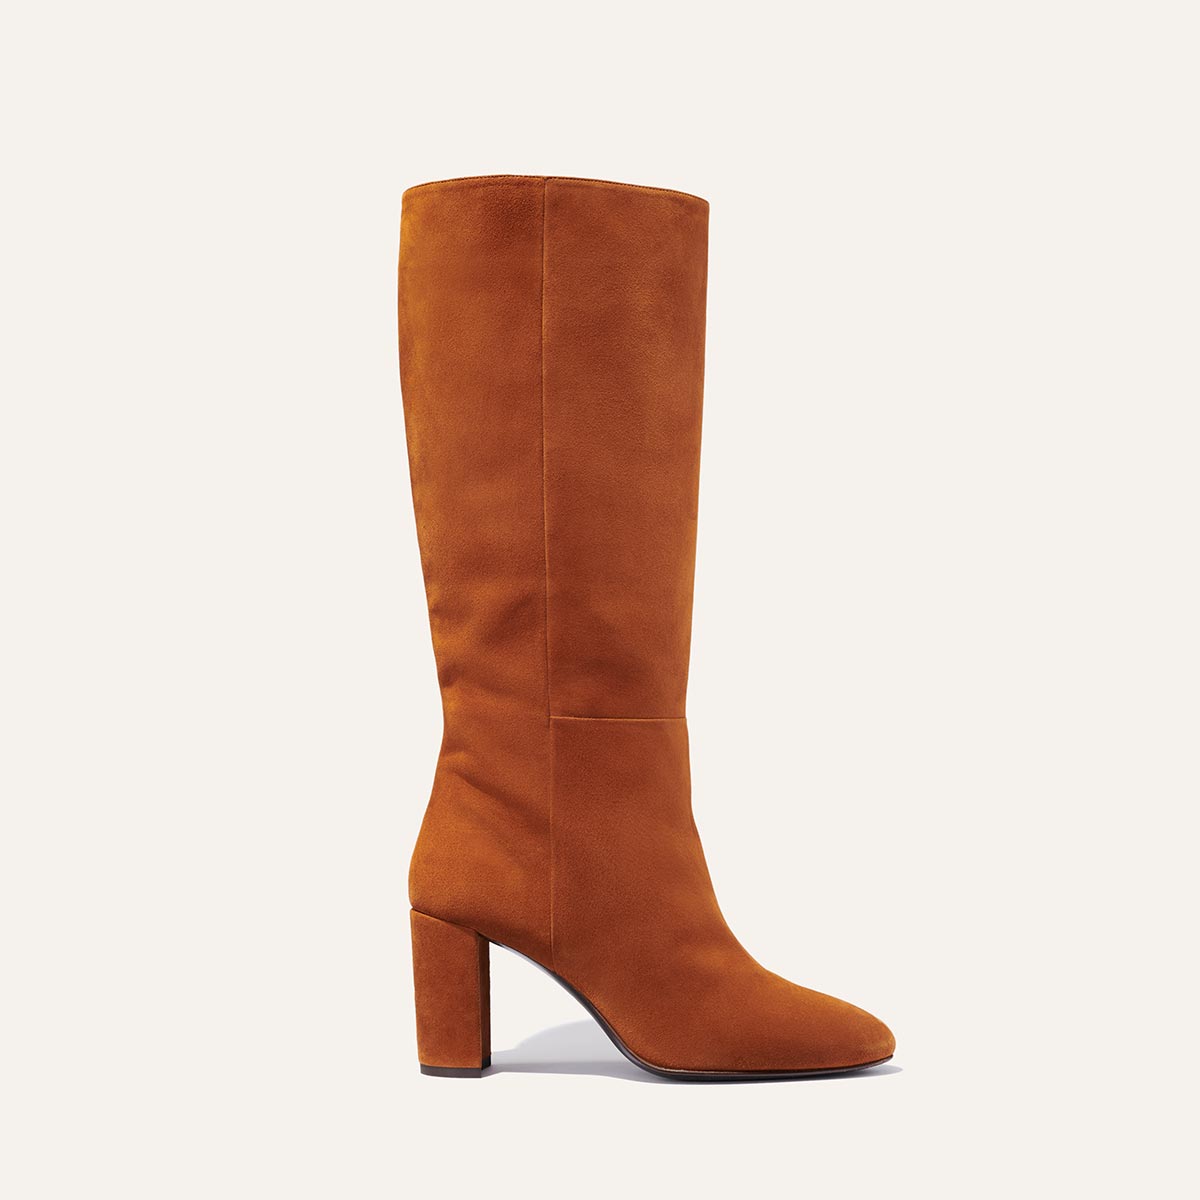 Margaux's knee-high Bleecker Boot in soft, tawny brown Italian suede with walkable heel and almond-shaped toe